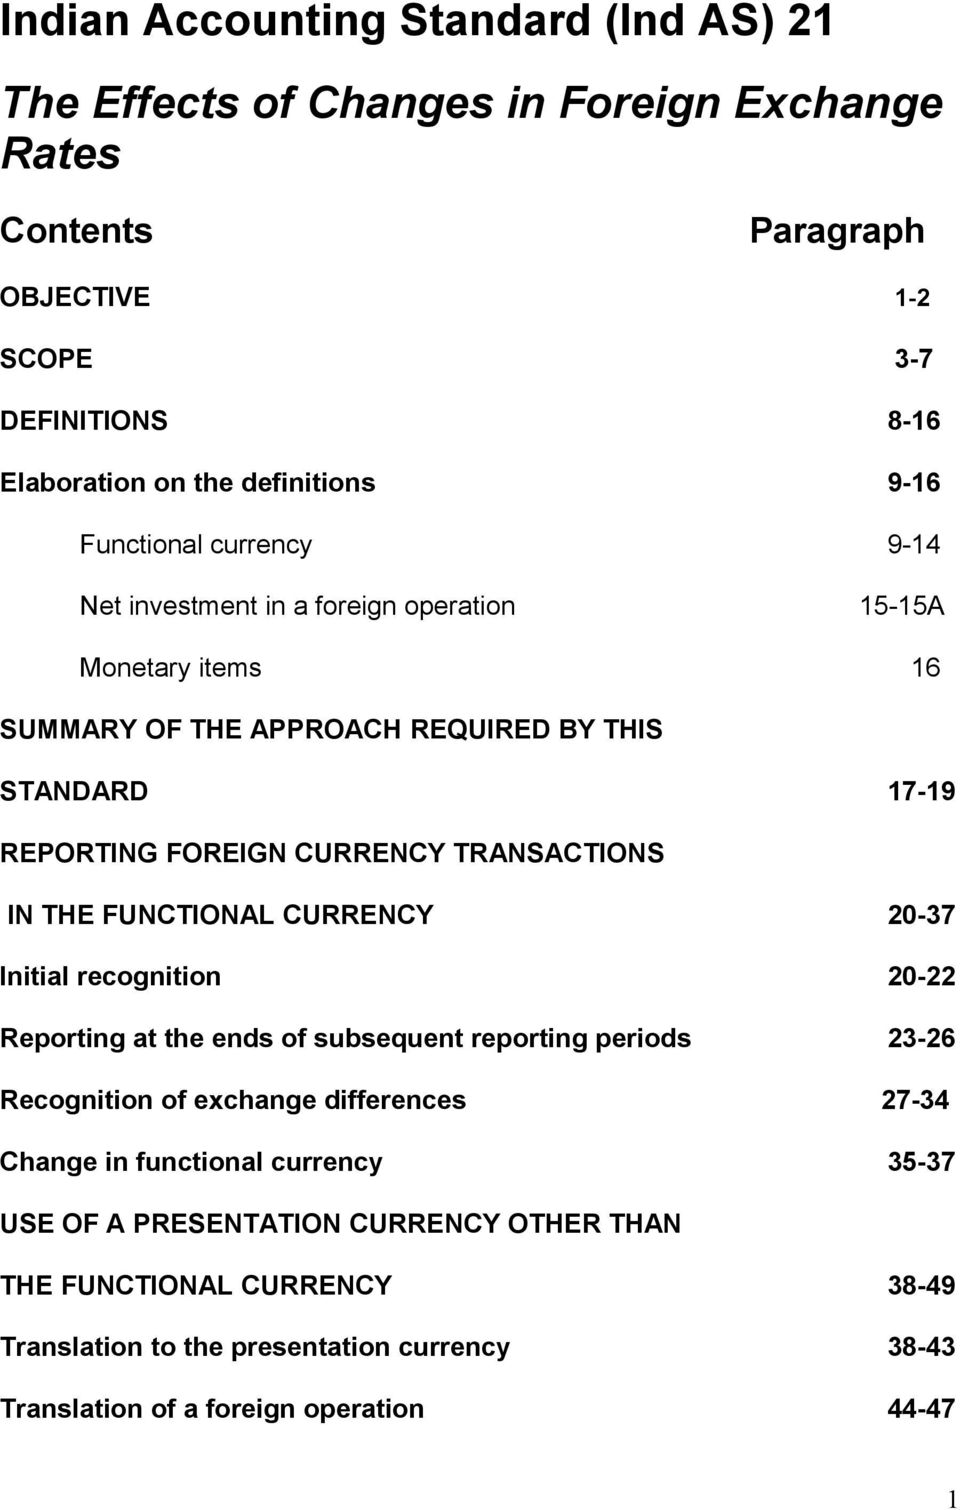 TRANSACTIONS IN THE FUNCTIONAL CURRENCY 20-37 Initial recognition 20-22 Reporting at the ends of subsequent reporting periods 23-26 Recognition of exchange differences 27-34 Change